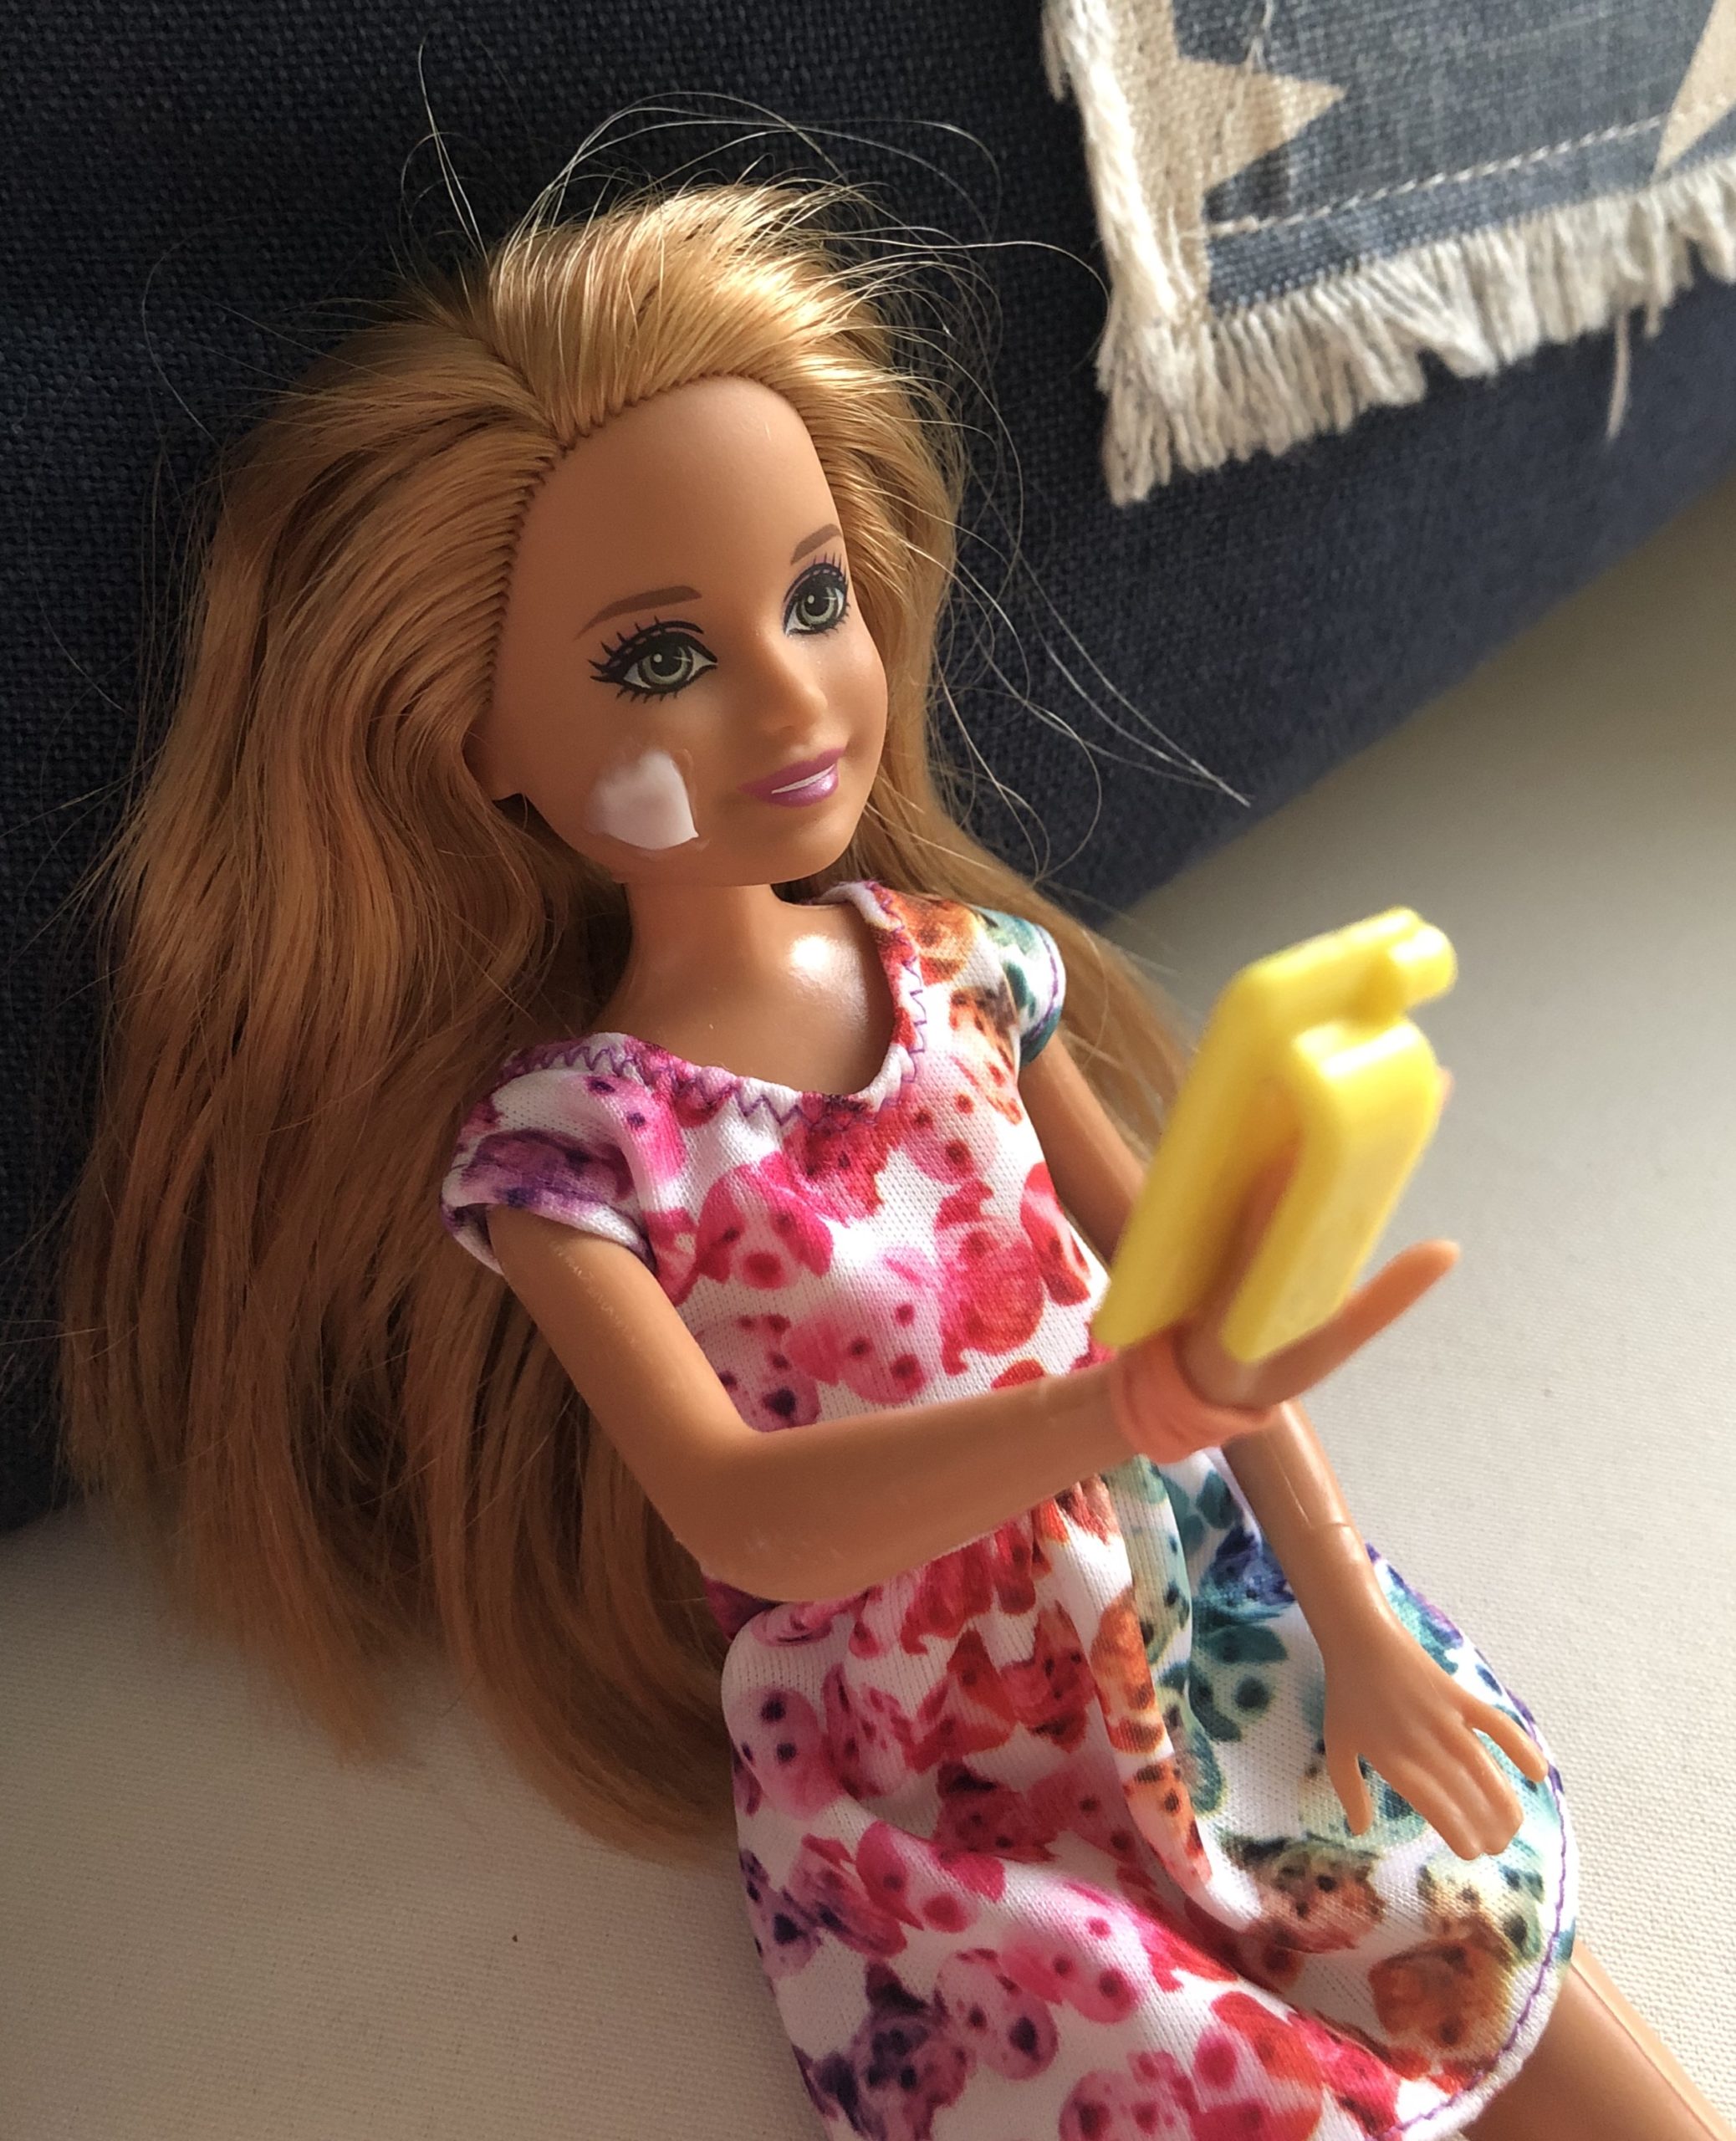 A Stacie doll holding a cell phone.